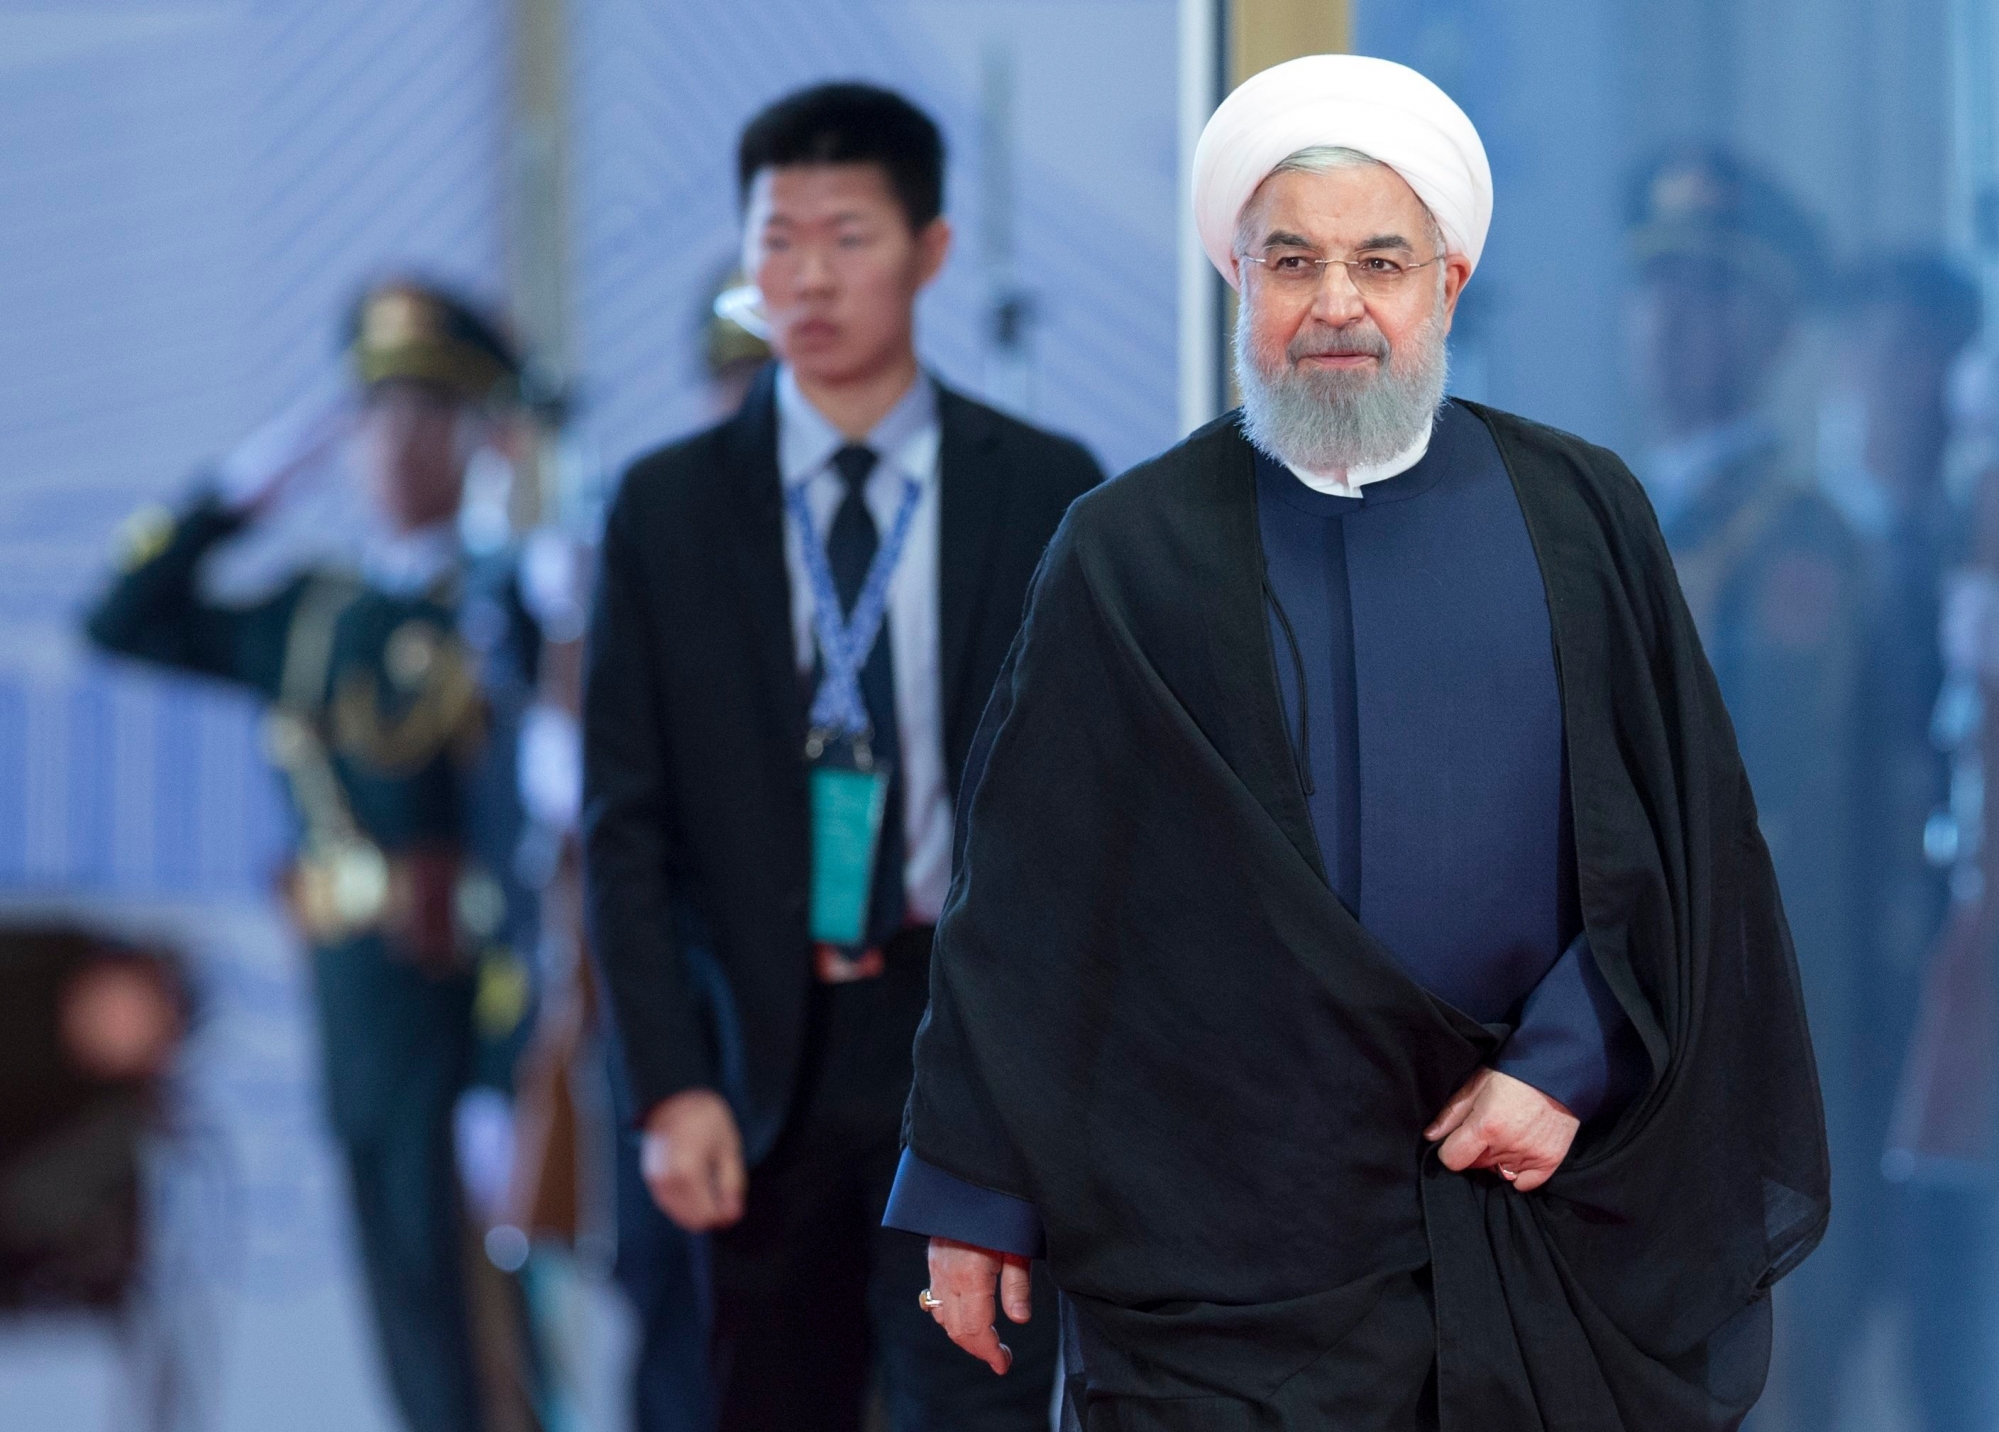 ARCHIVBILD ZUM BESUCH VON IRANS PRAESIDENT HASSAN ROHANI AM 3. UND 4. JULI IN DER SCHWEIZ, AM FREITAG, 29. JUNI 2018 - Iranian President Hassan Rouhani arrives to attend the Shanghai Cooperation Organization (SCO) Summit in Qingdao in eastern China's Shandong Province, Sunday, June 10, 2018. China will seek to further promote its economic links with Central Asia during this weekend's summit of the China and Russia-dominated SCO. (AP Photo/Alexander Zemlianichenko) IRAN BESUCH SCHWEIZ